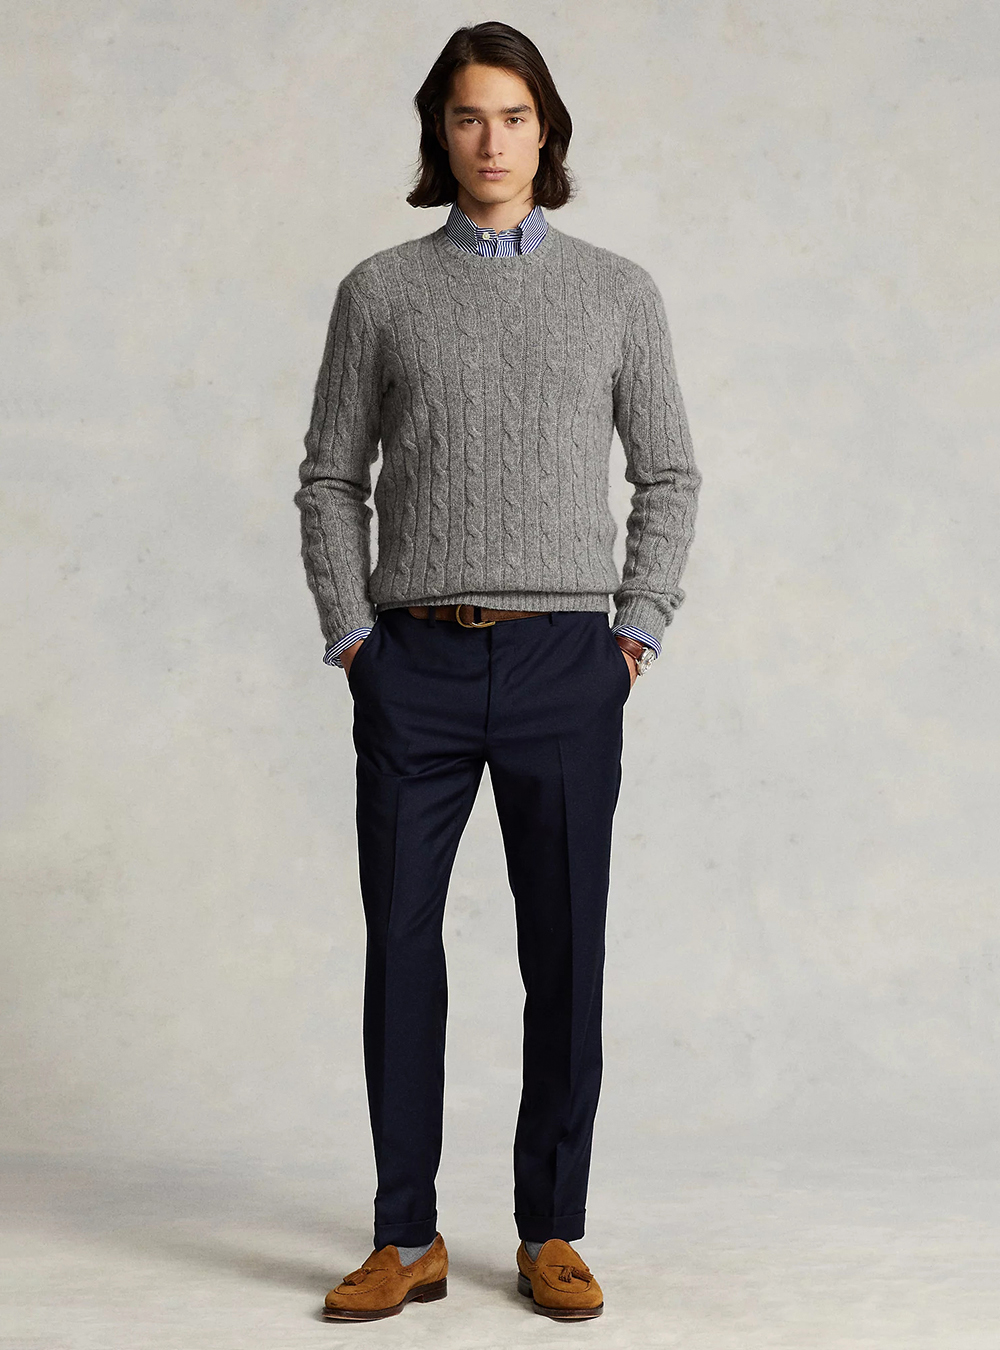 grey sweater, blue shirt, navy pants, and brown suede loafers